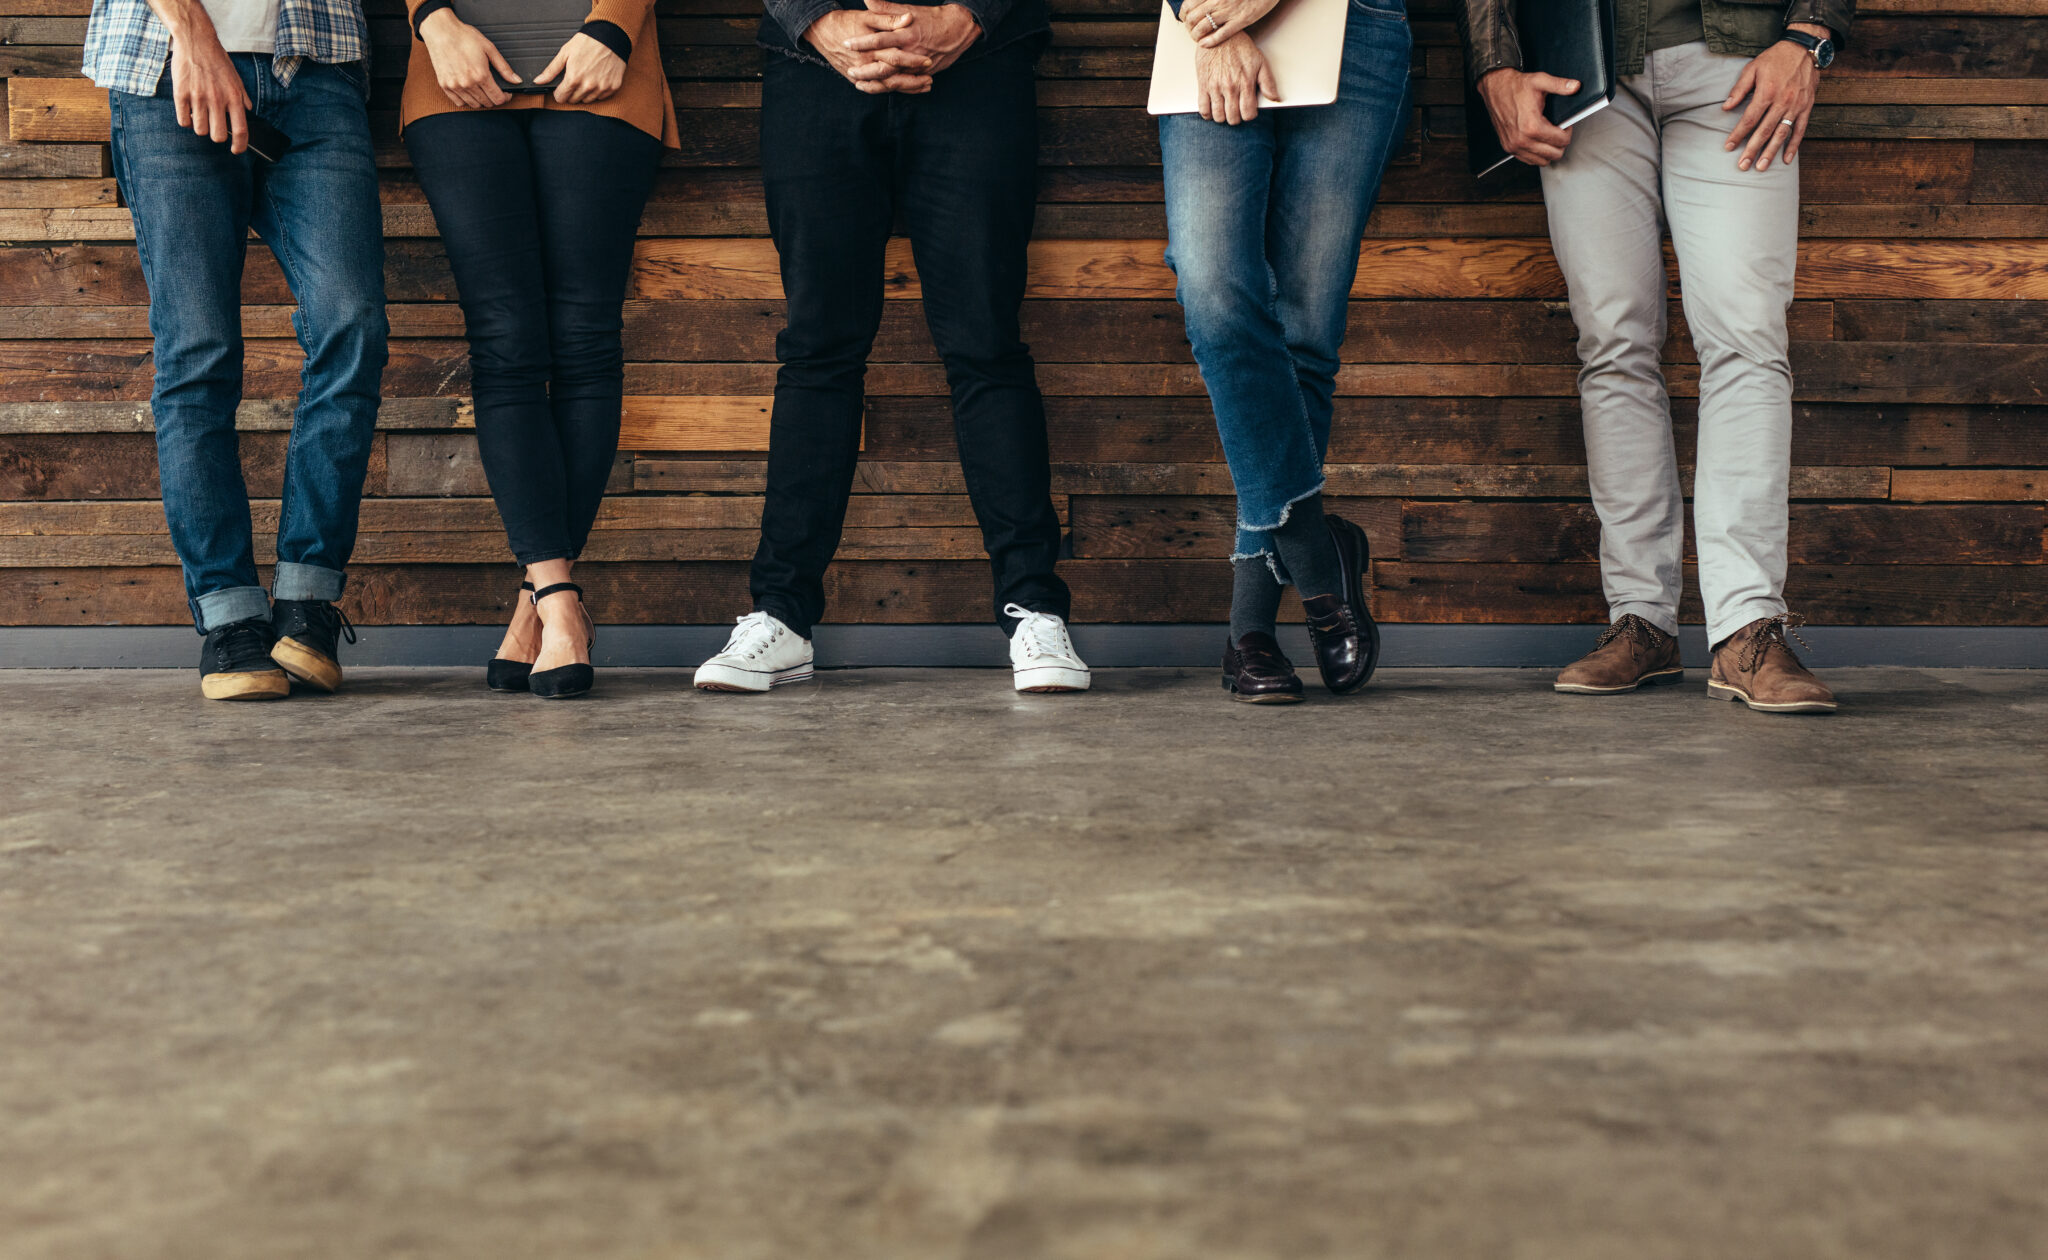 Group of people leaning against the wall before a job interview with folders in hands in the waiting room. Cropped shot of legs of people standing in row waiting for job interview.